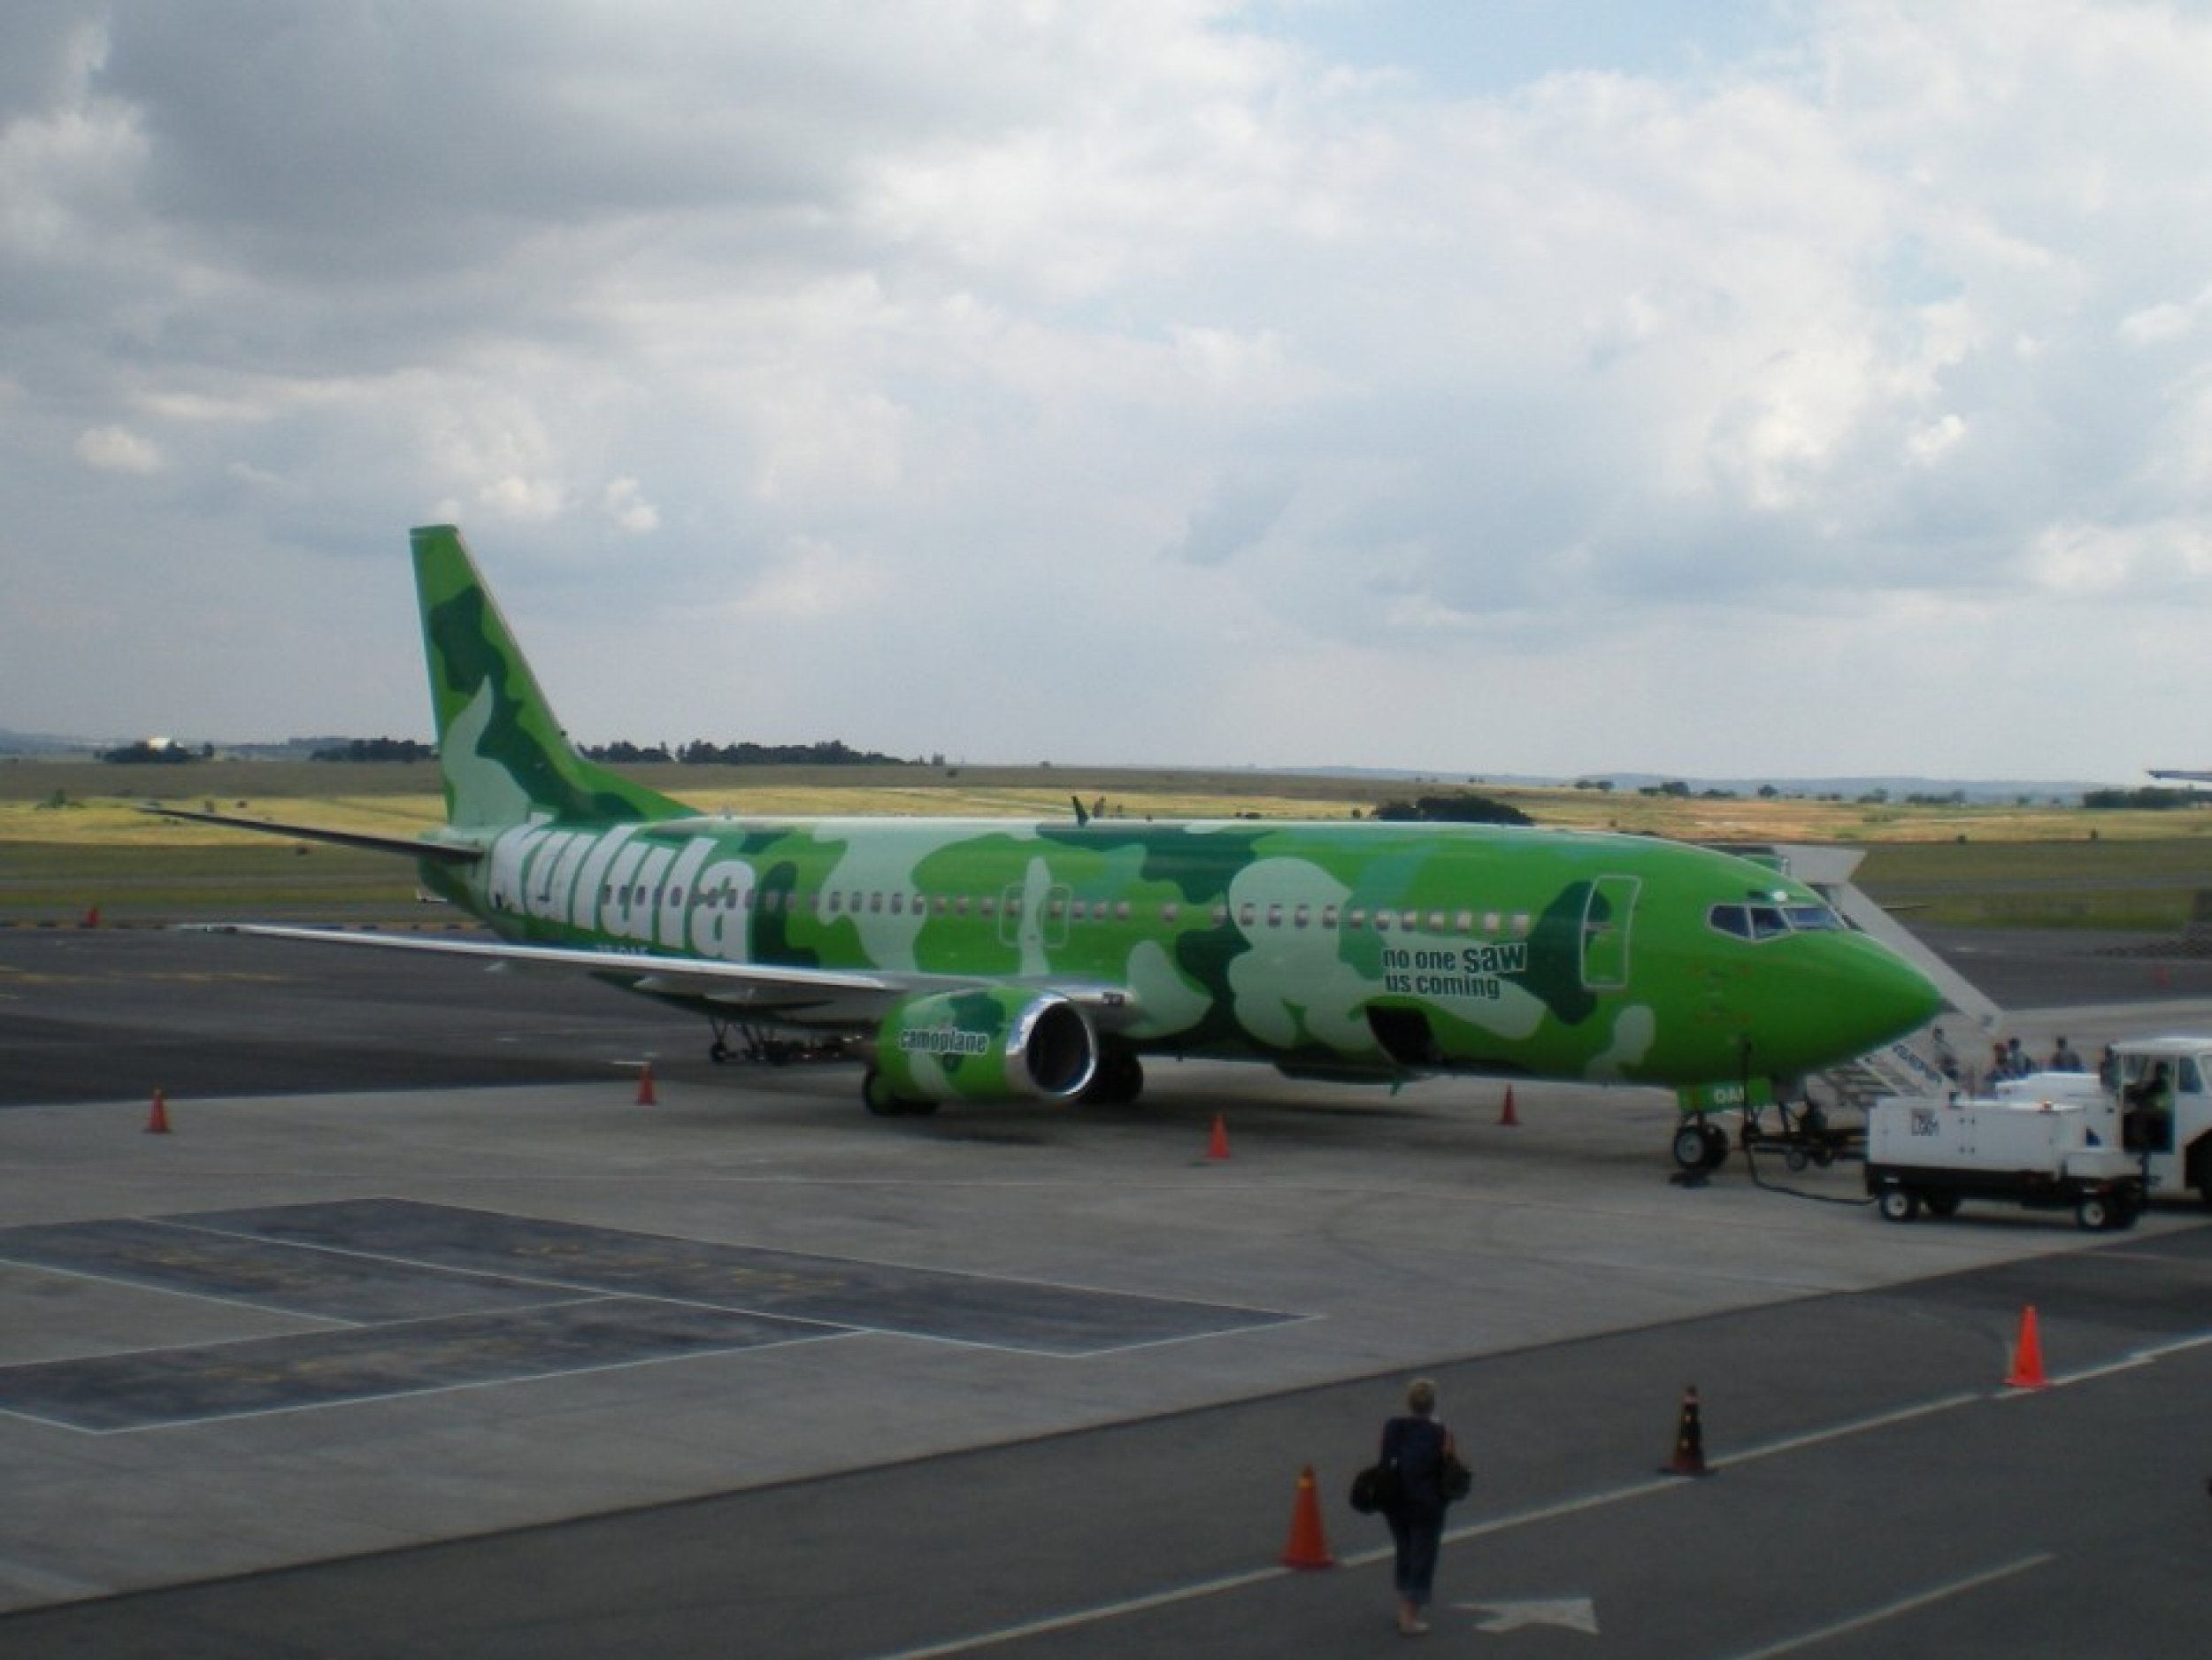 Dont worry Kulula, nobodys going to notice your camouflaged jumbo jet on the runway.